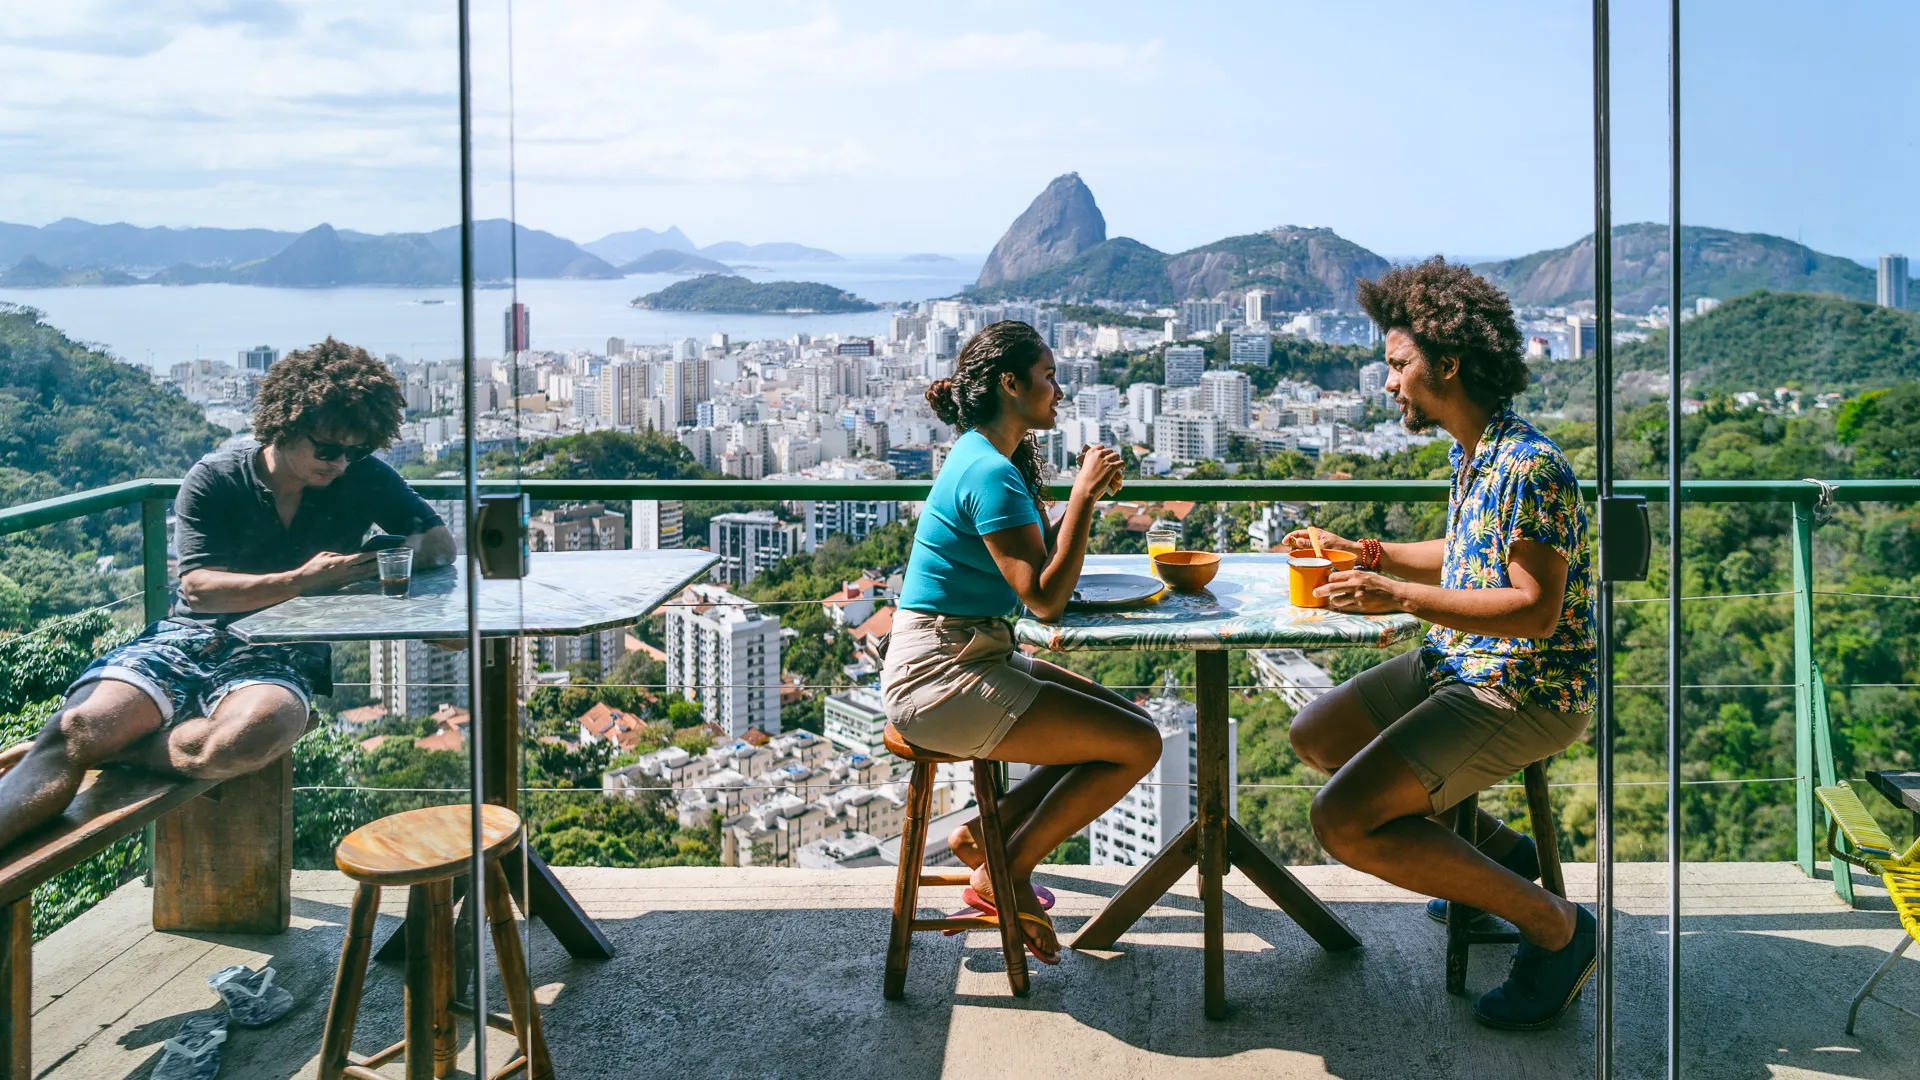 Man and woman on balcony, scenic view and city backdrop, on vacation.